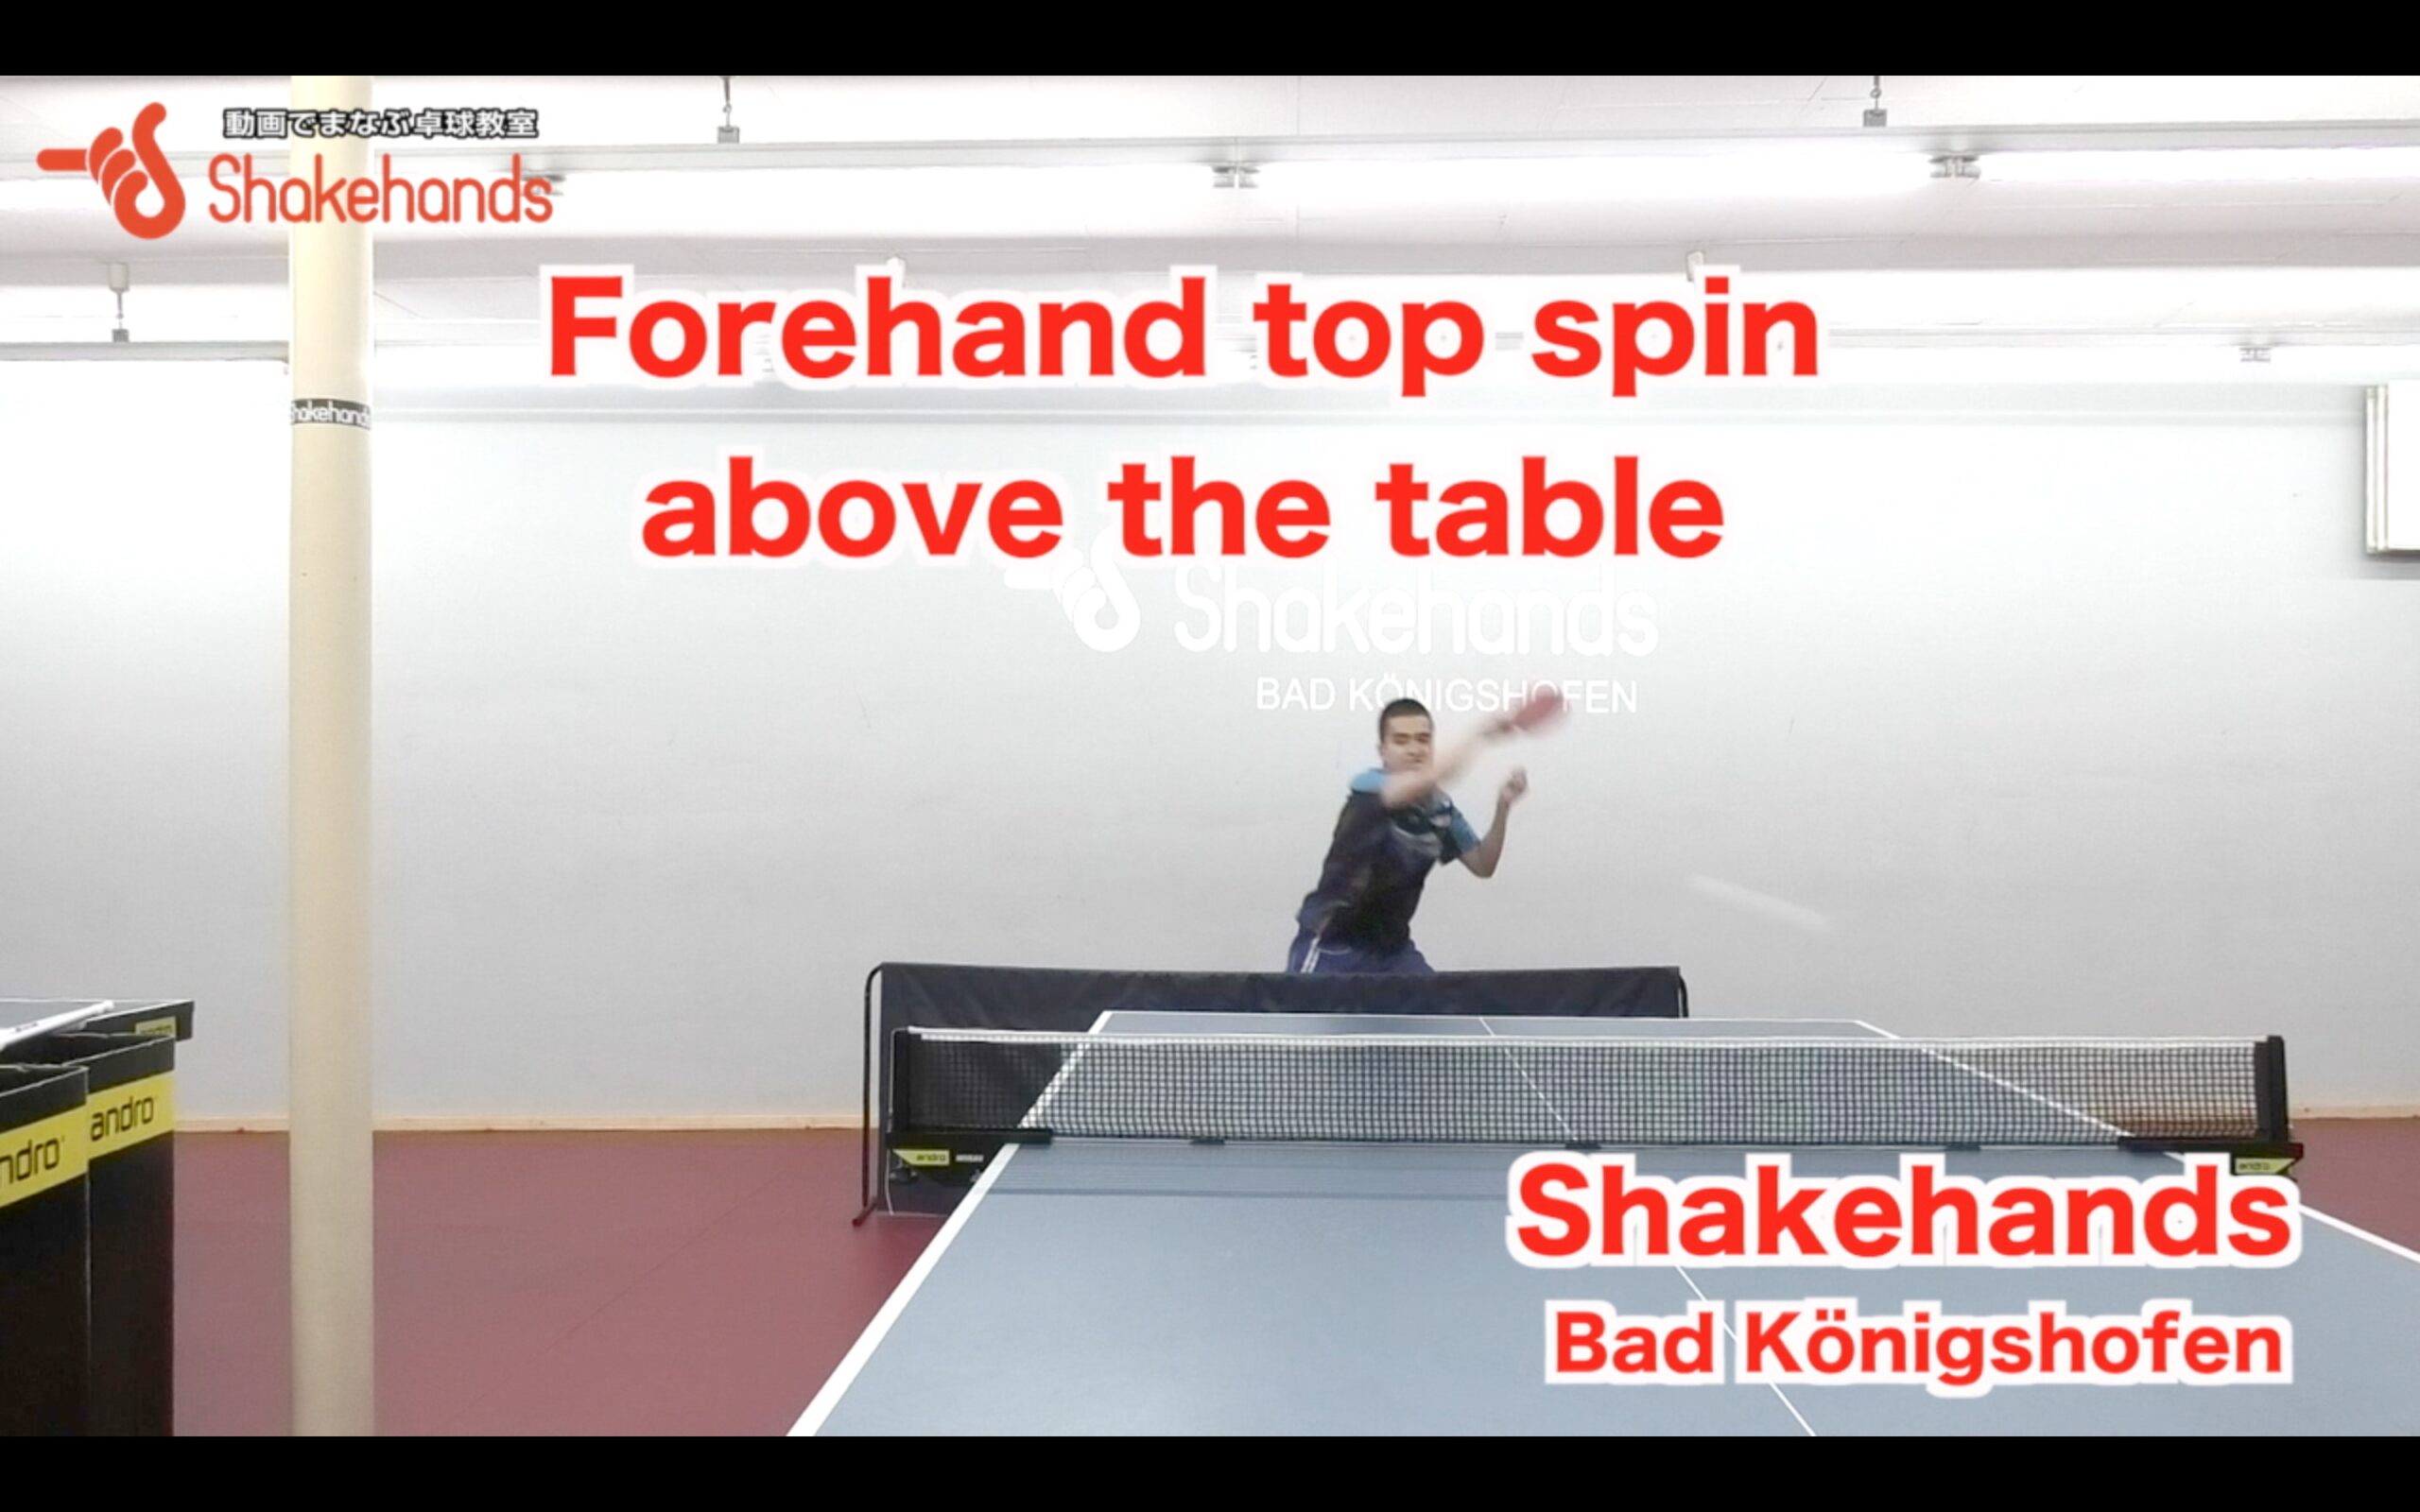 Forehand top spin above the table